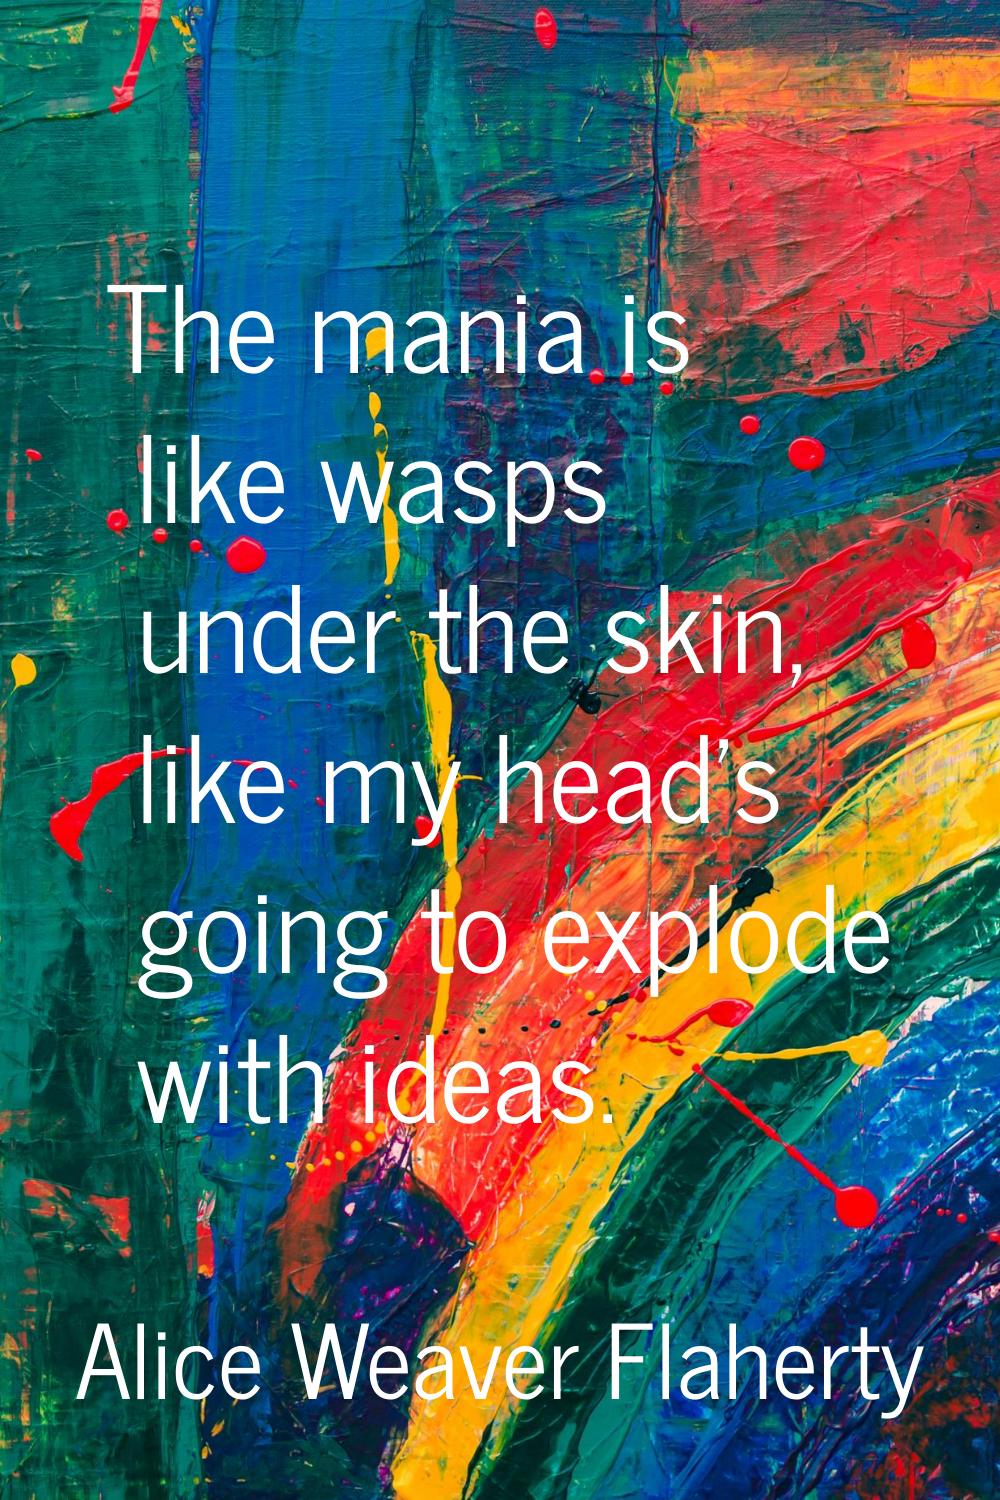 The mania is like wasps under the skin, like my head's going to explode with ideas.